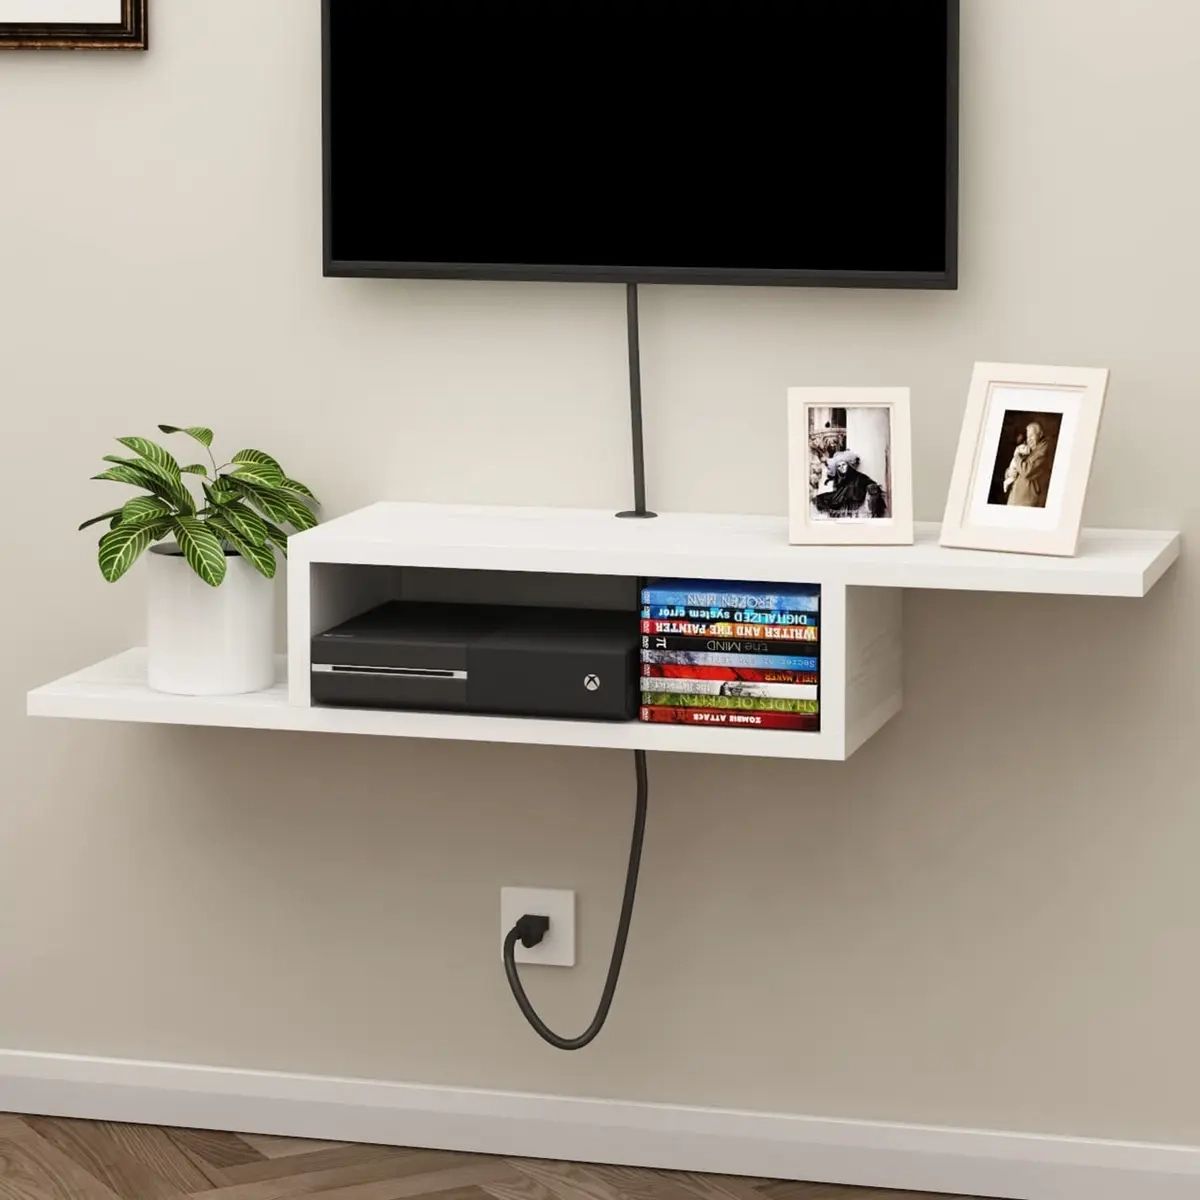 Floating Tv Stand Shelf, Wall Mount Entertainment Center Media Console For  Livin | Ebay Intended For Floating Stands For Tvs (View 5 of 15)